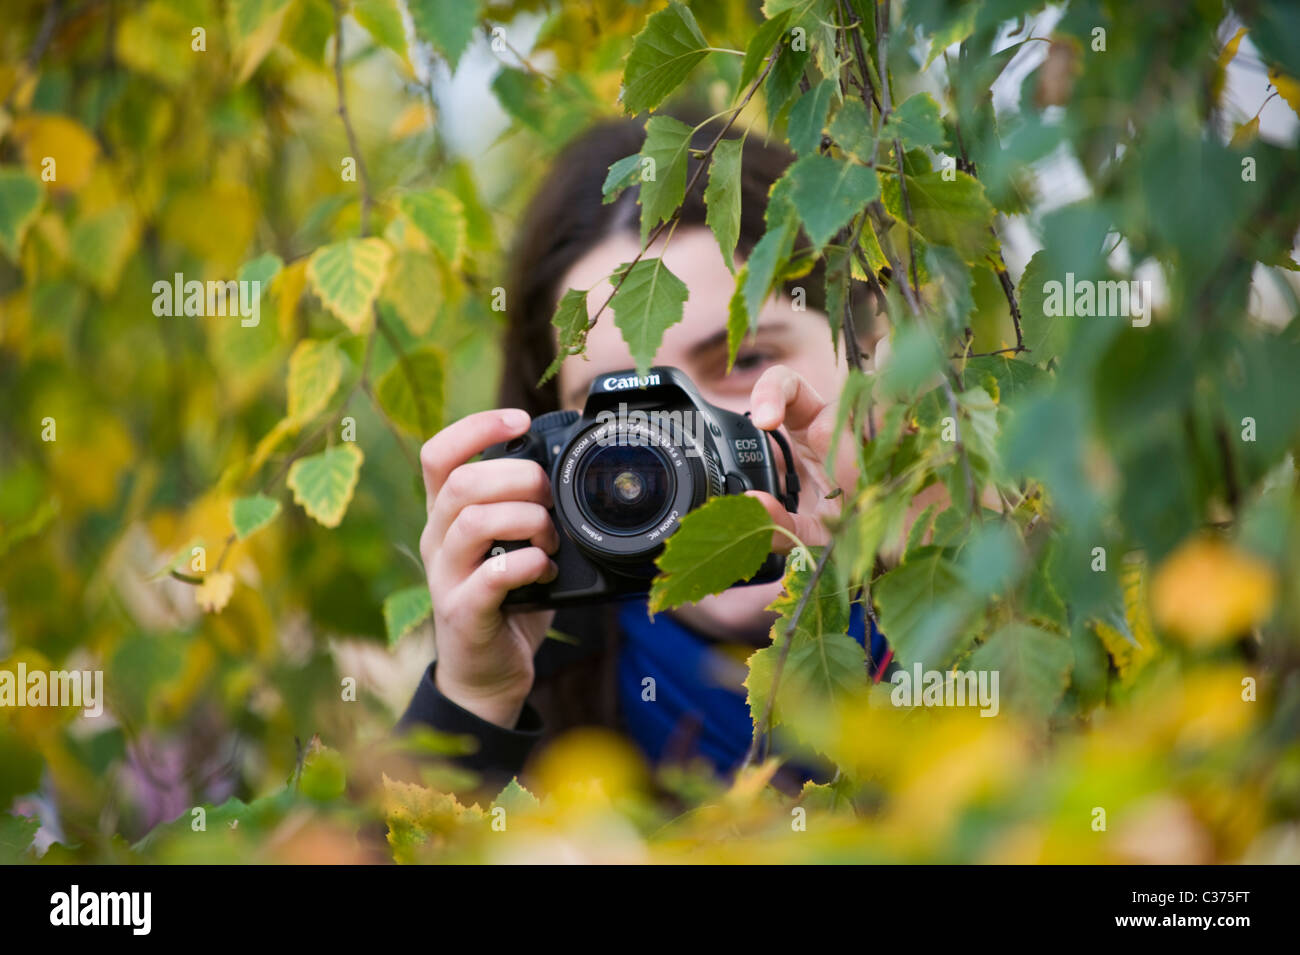 Young woman with Canon digital SLR camera taking photographs from cover of bushes Stock Photo